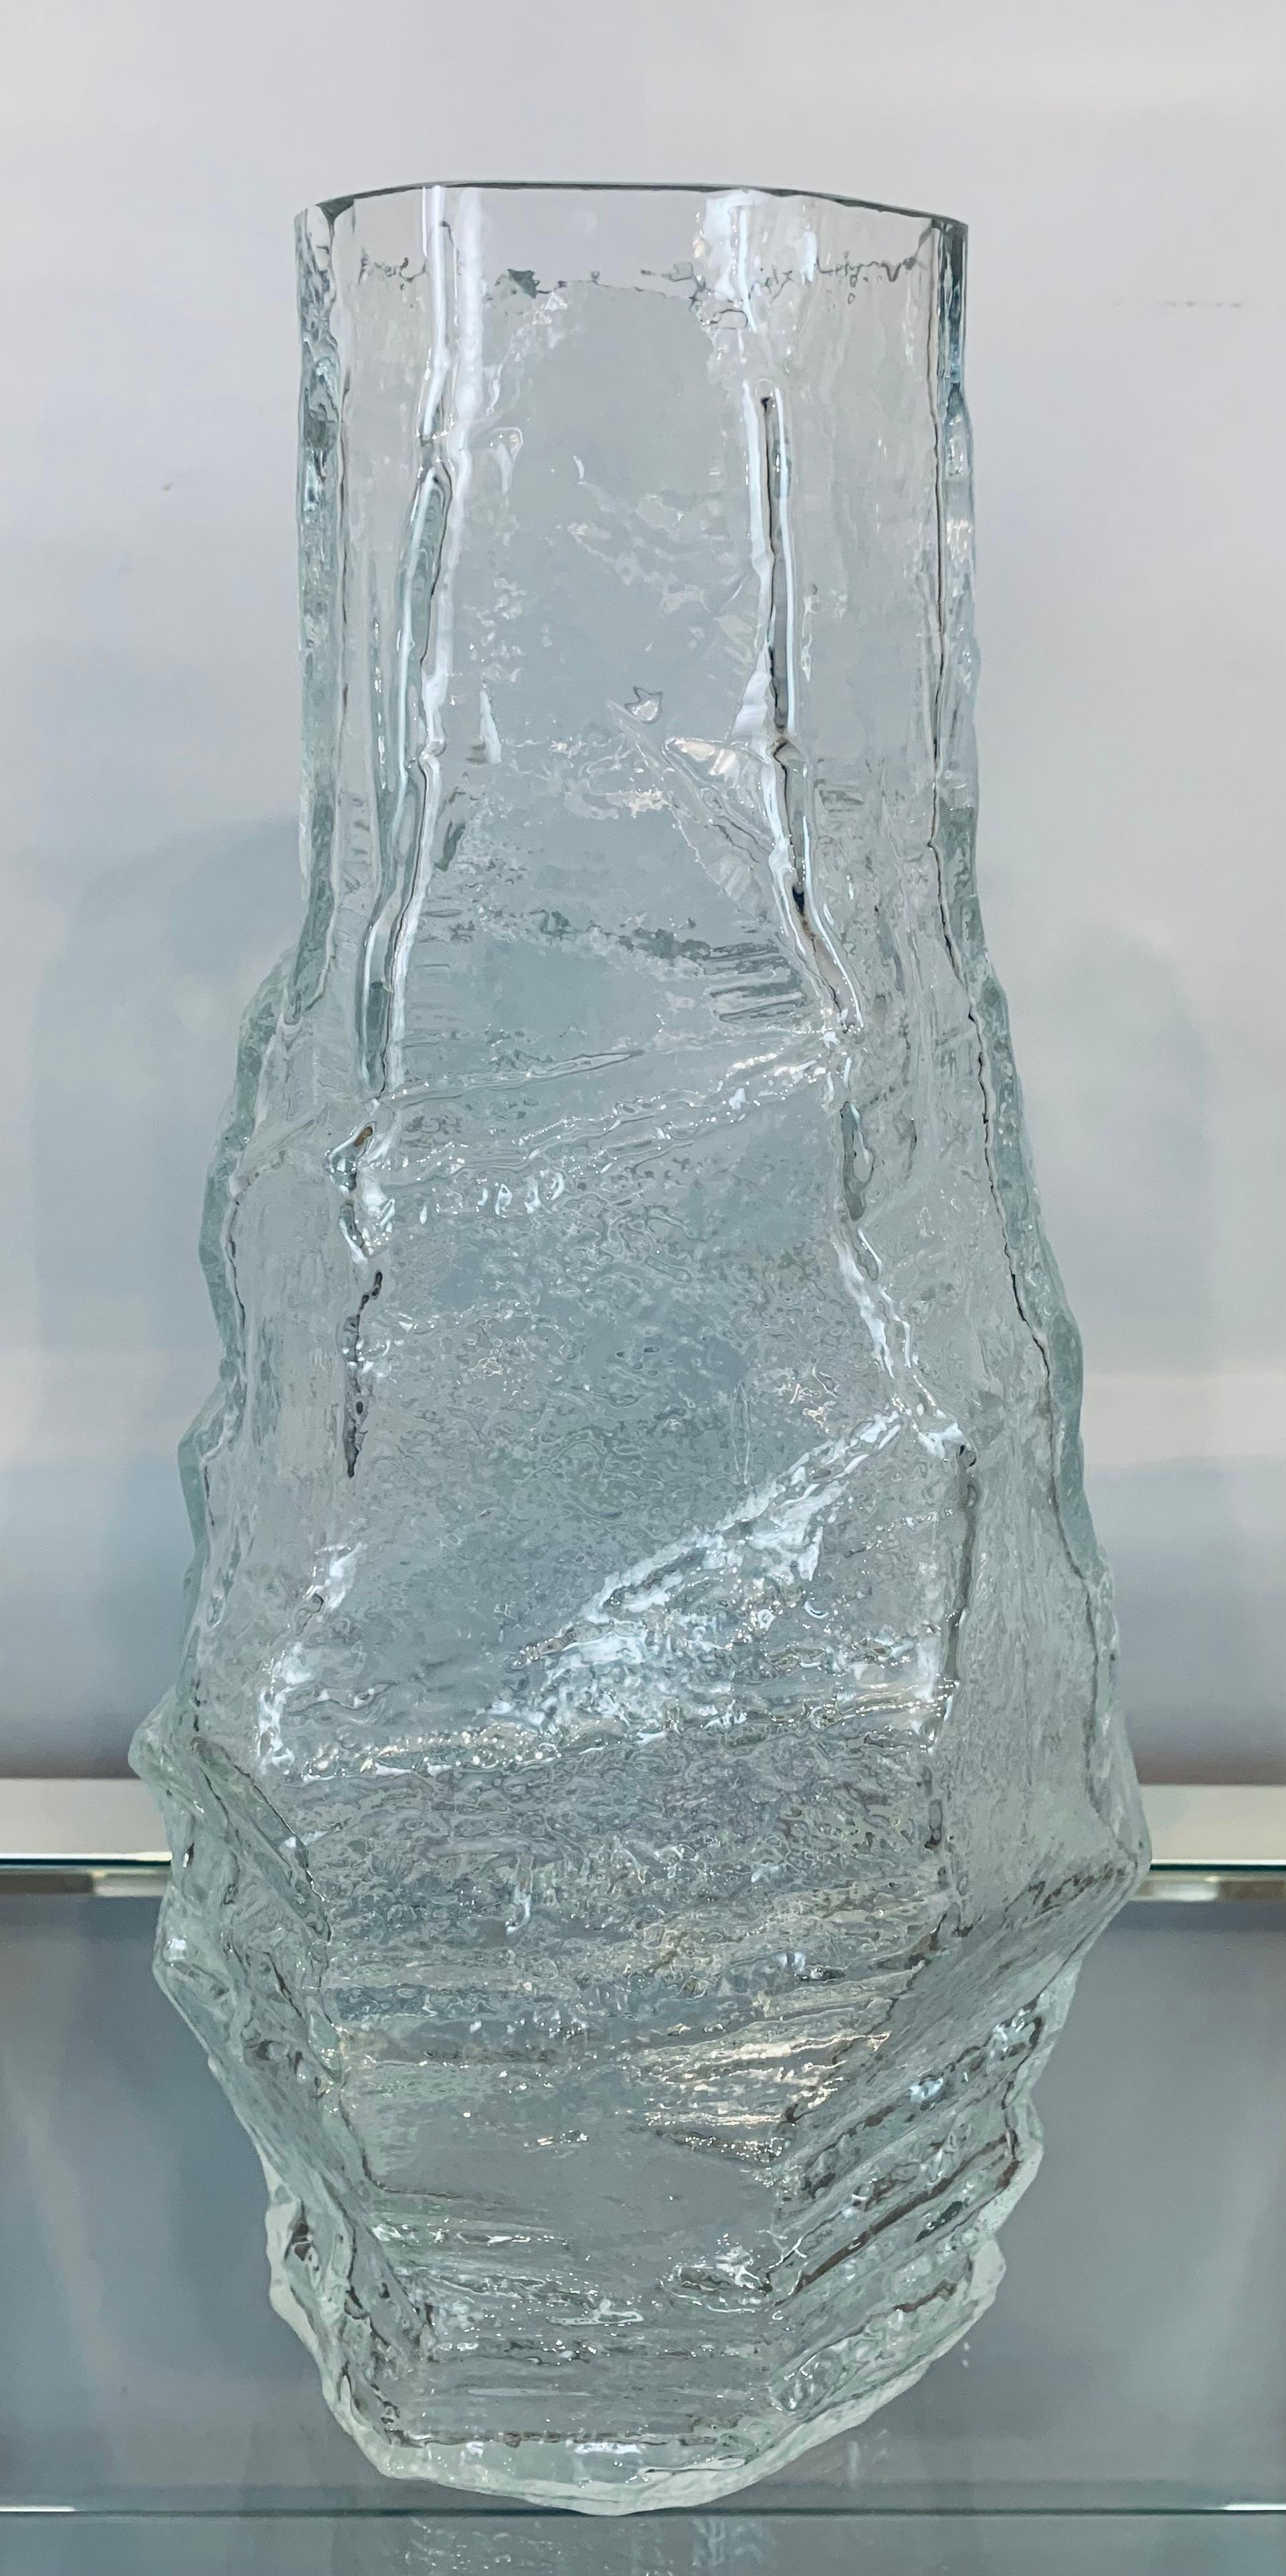 A large and unusual 1970s thick and heavy 'glacier' clear glass vase manufactured by Peill & Putzler of Germany. In very good vintage condition with some small scratches on the base commensurate with its age.

Dimensions

Diameter of the top: